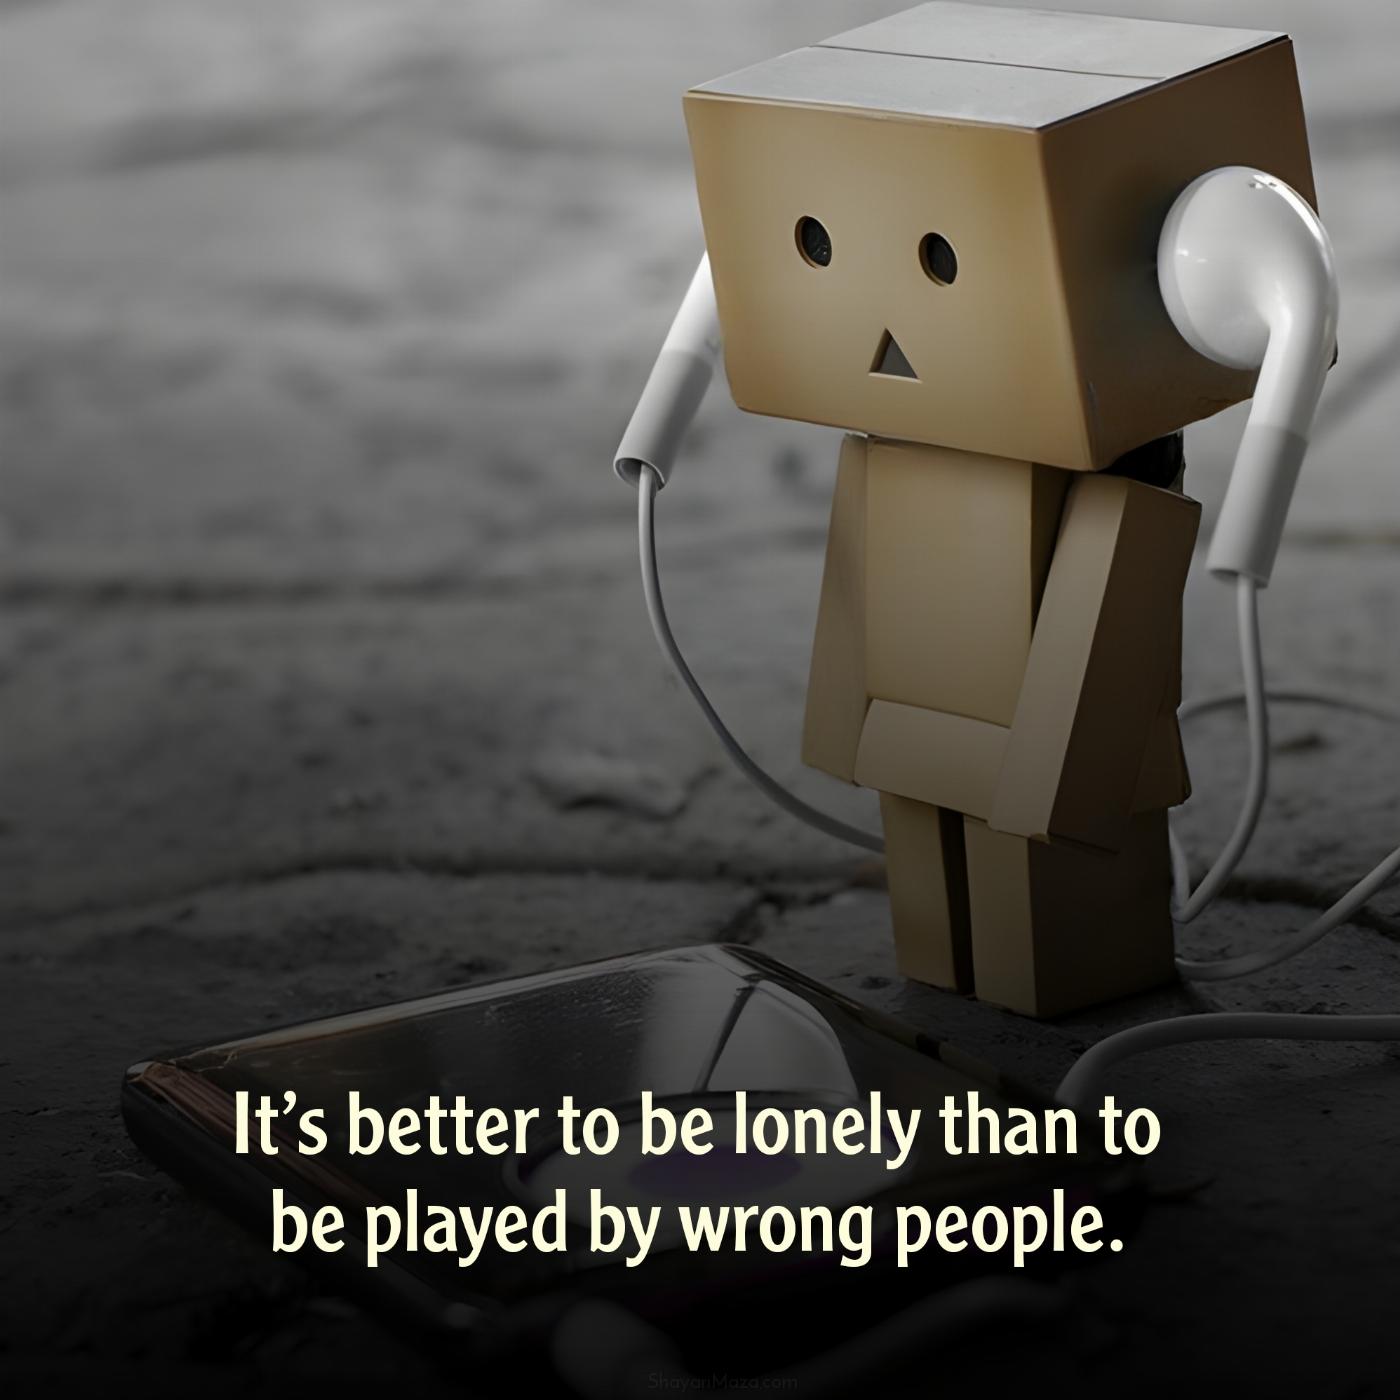 Its better to be lonely than to be played by wrong people